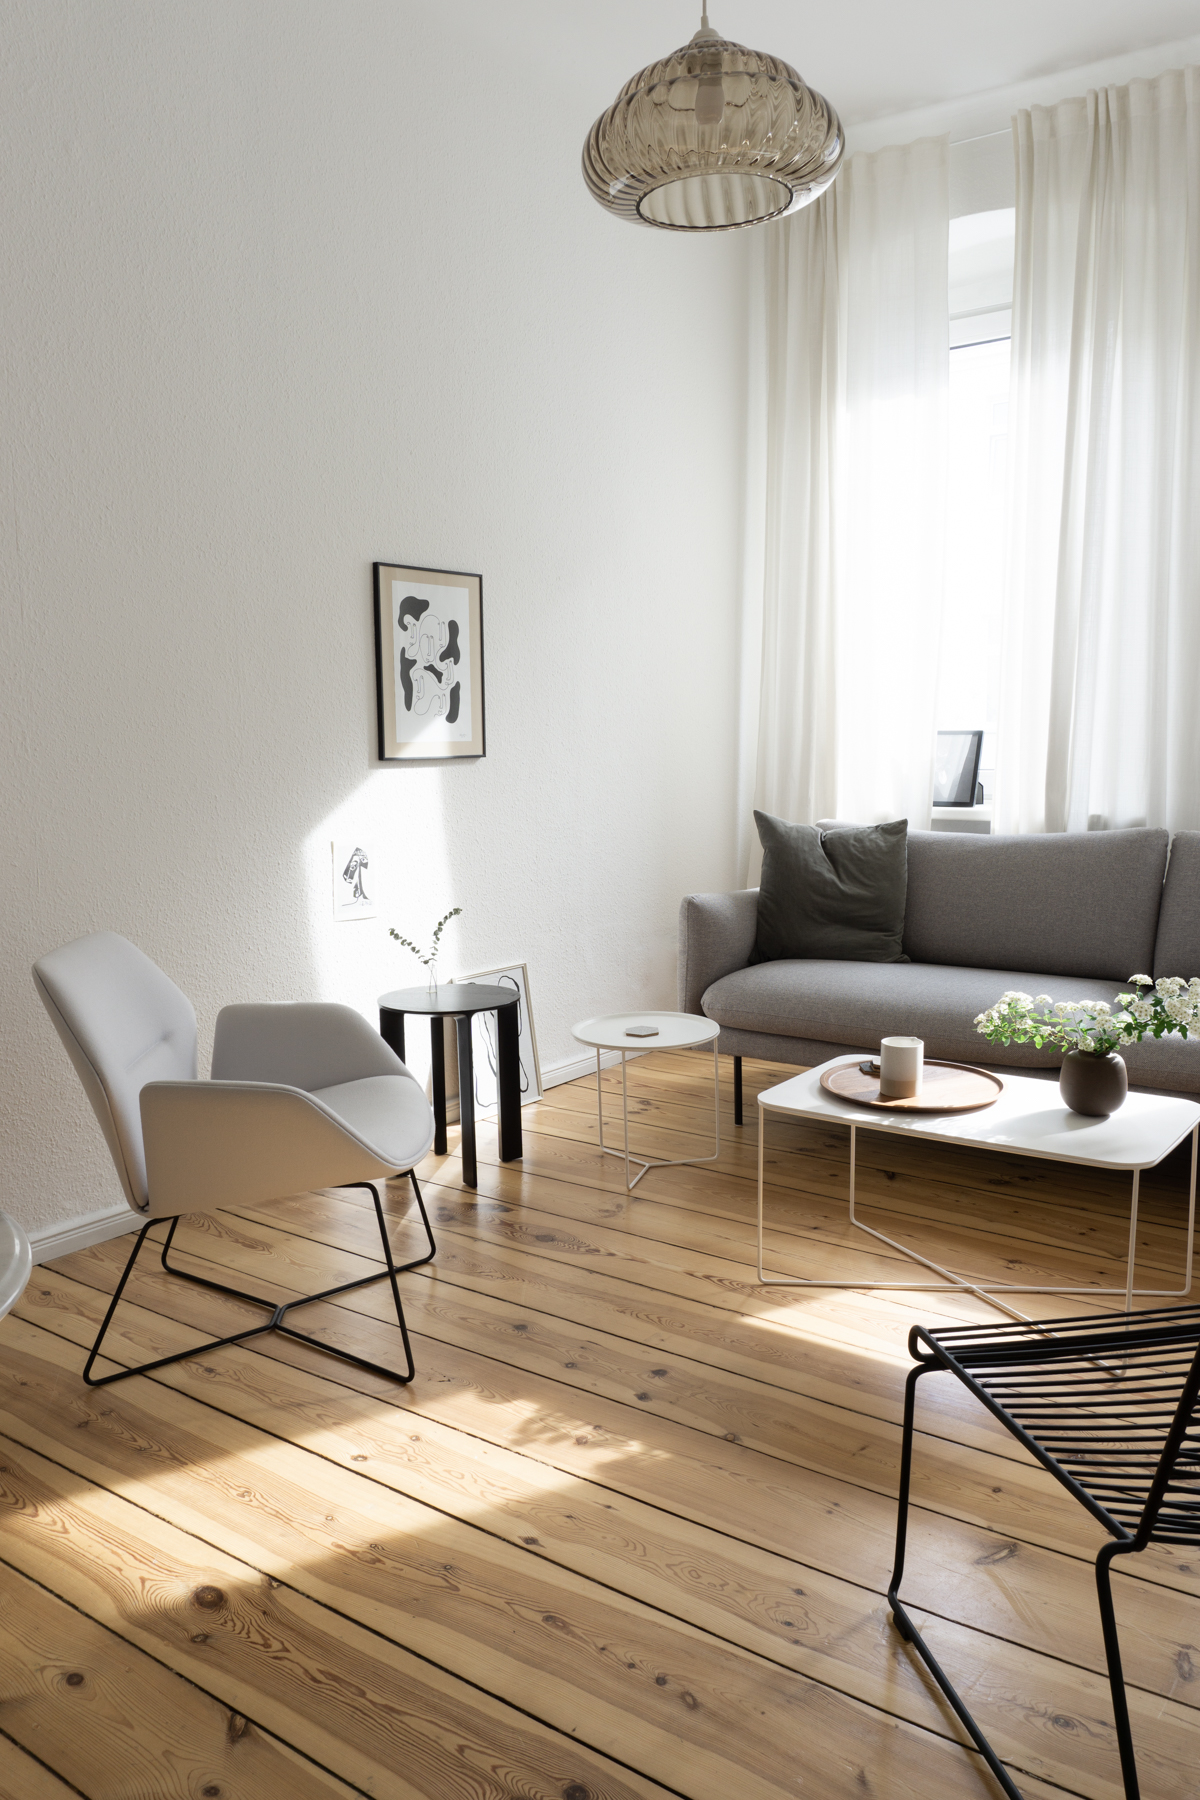 Minimalism With Warmth: Overcoming The Cold In Nordic Interiors